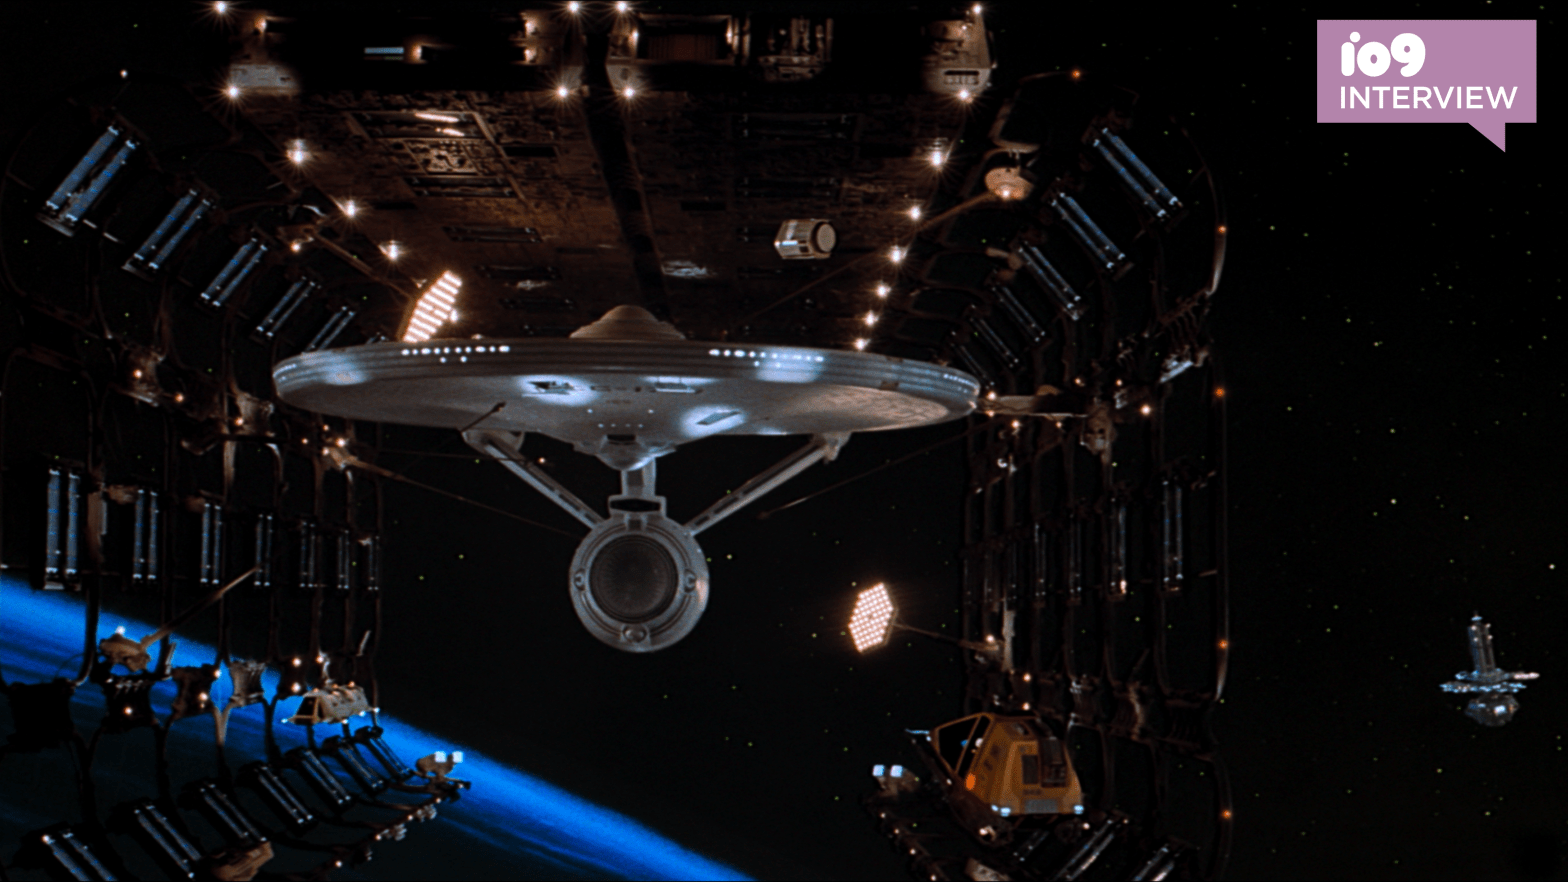 The Enterprise has never looked better. (Image: Paramount)